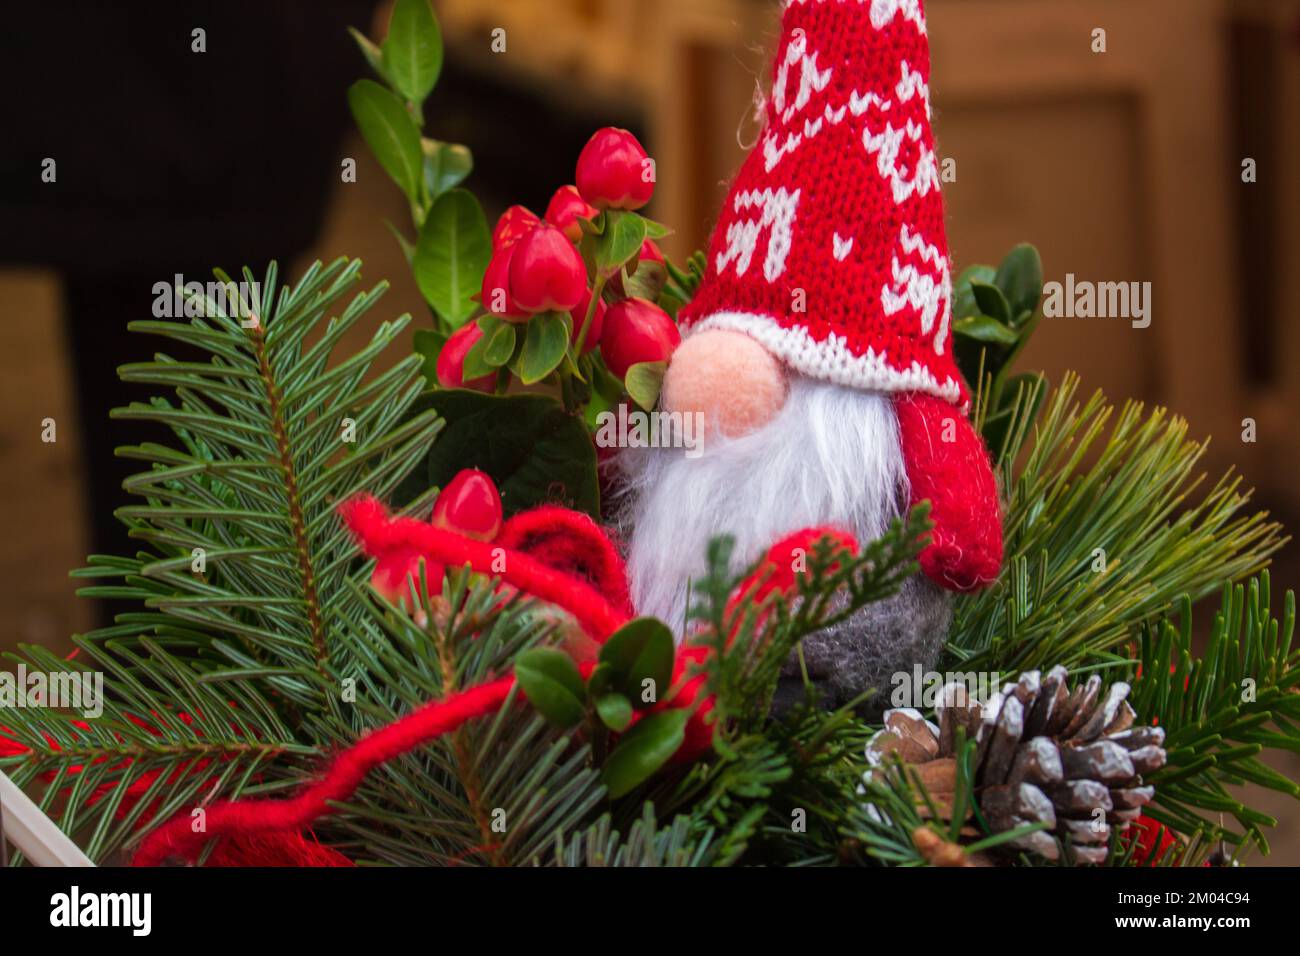 Cute gnome toy on Christmas tree. Small dwarf doll in red hat. Santa Claus doll on Christmas market. Christmas market. Christmas decor on pine tree. Stock Photo